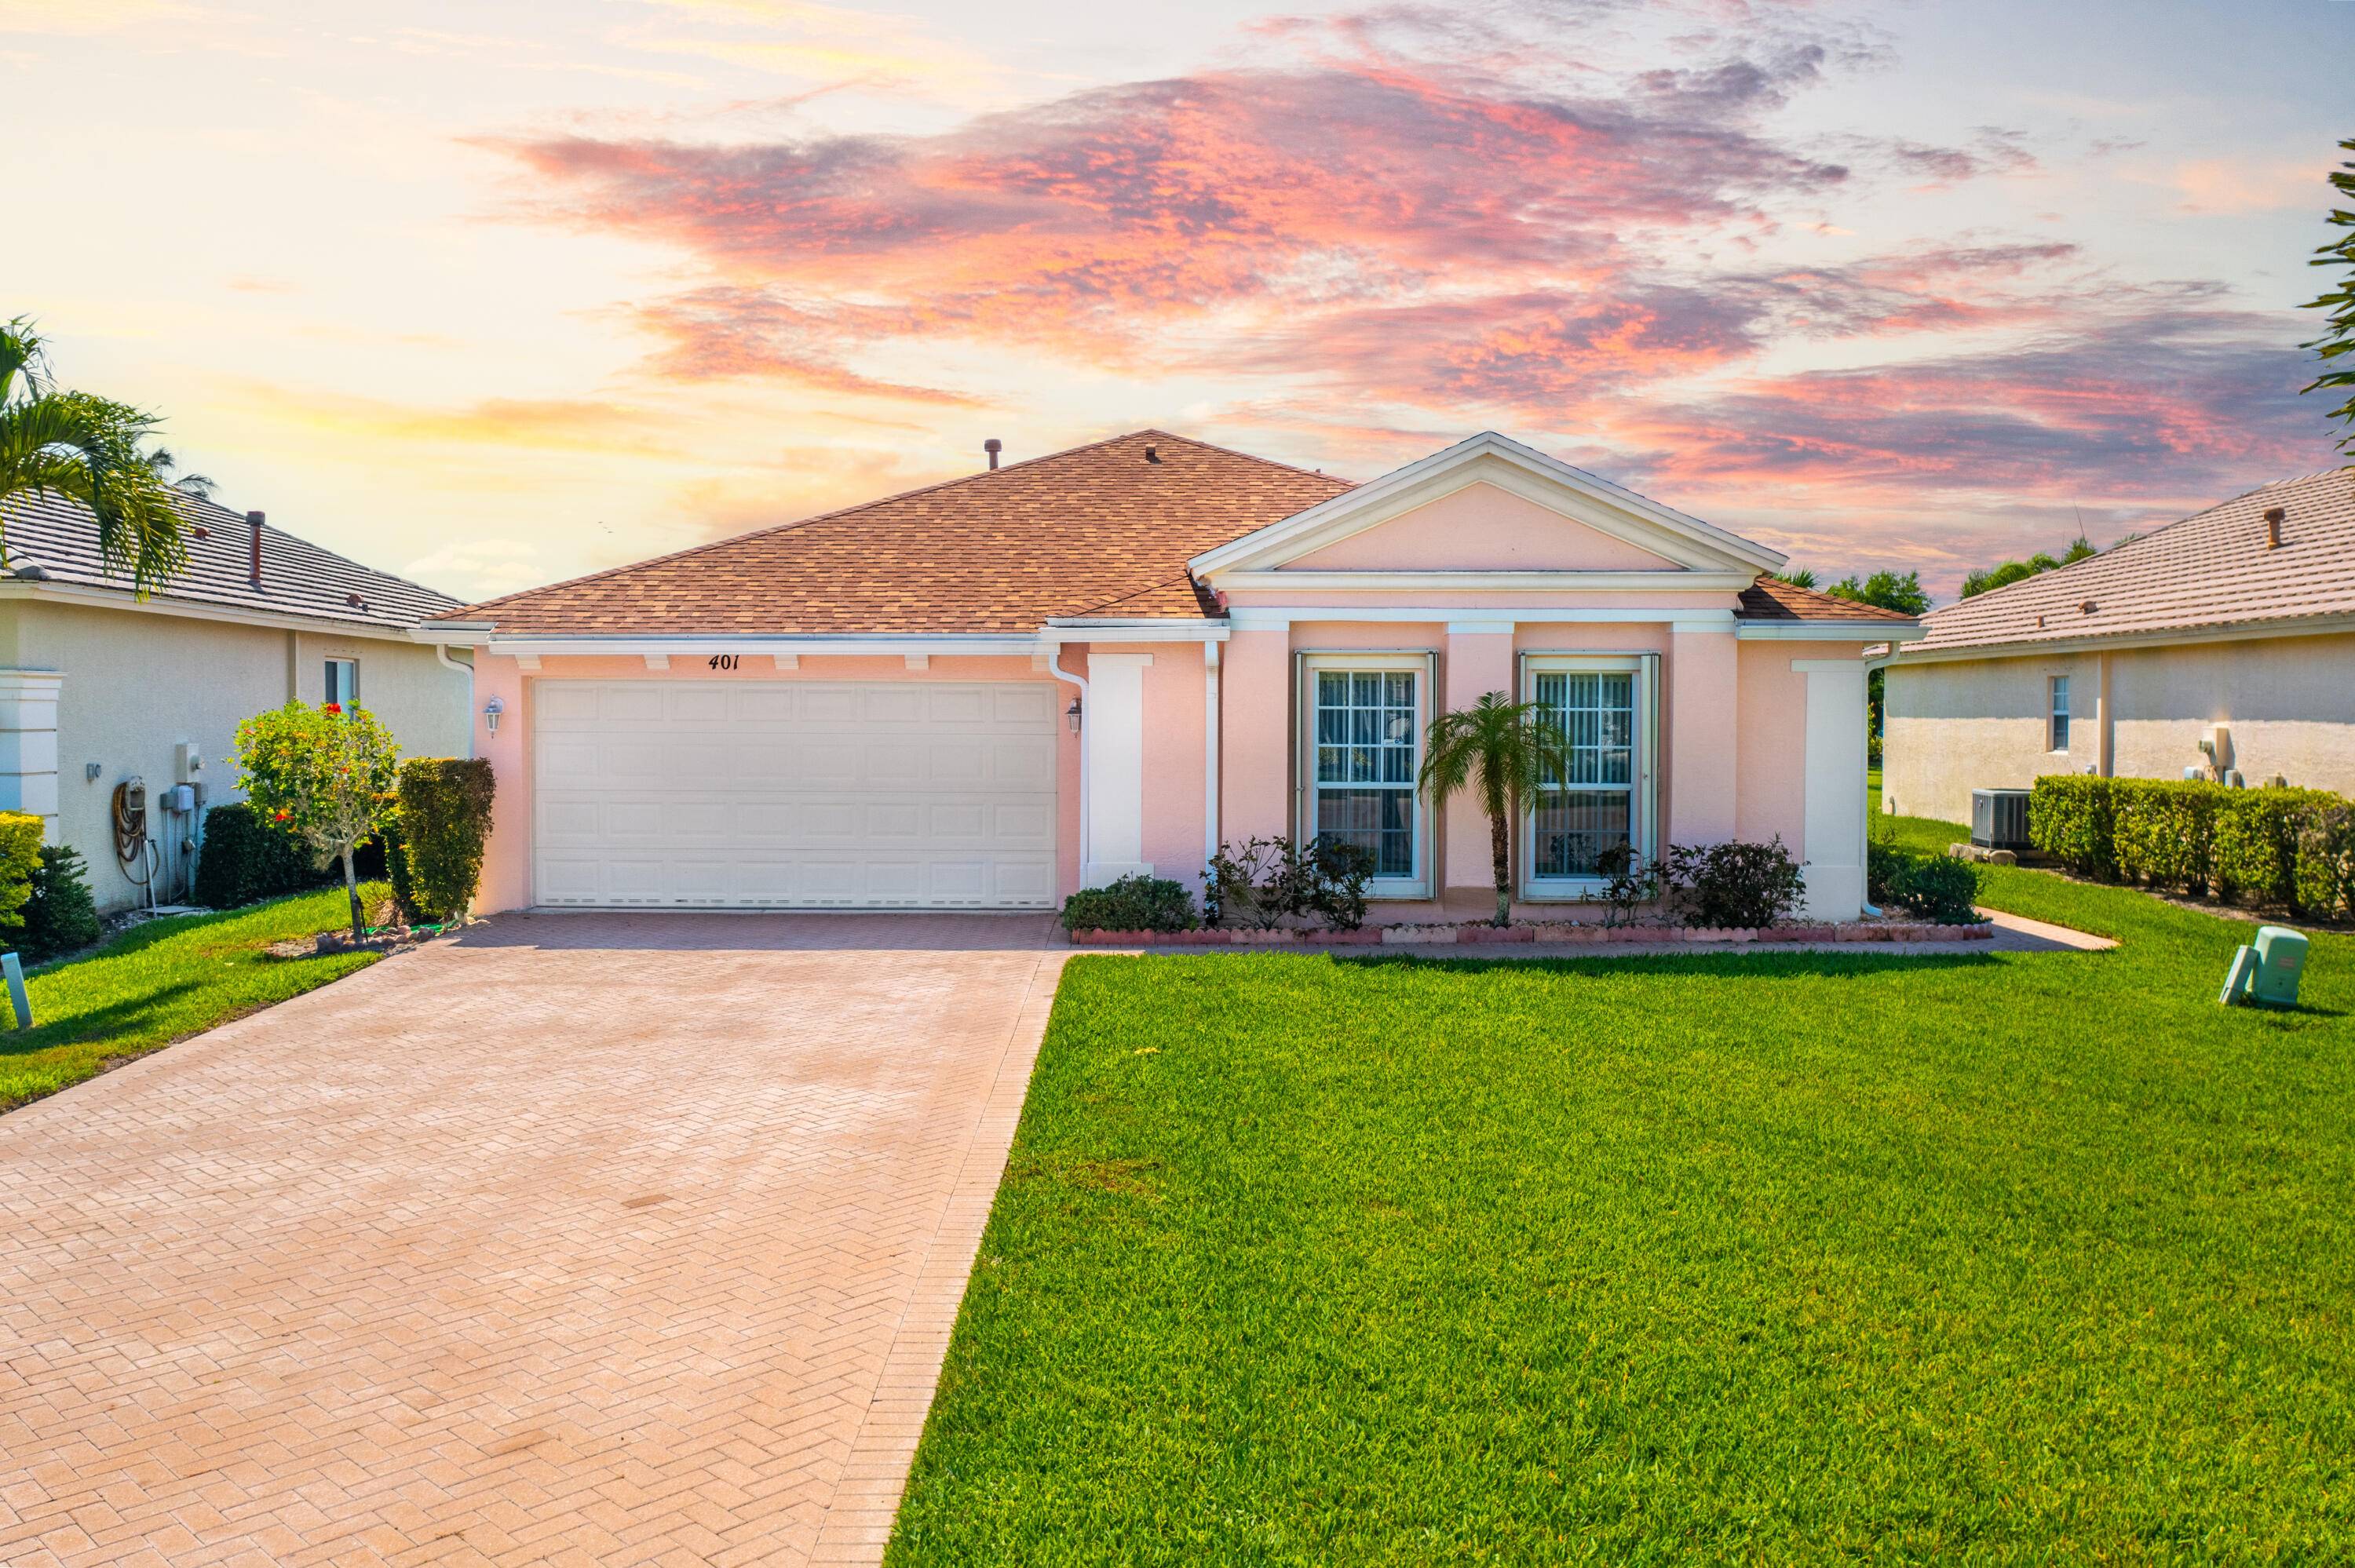 Welcome home to this Beautiful 3 bedroom, 2 bathroom and 2 car garage home located inside one of the most beautiful gated community in St Lucie West.